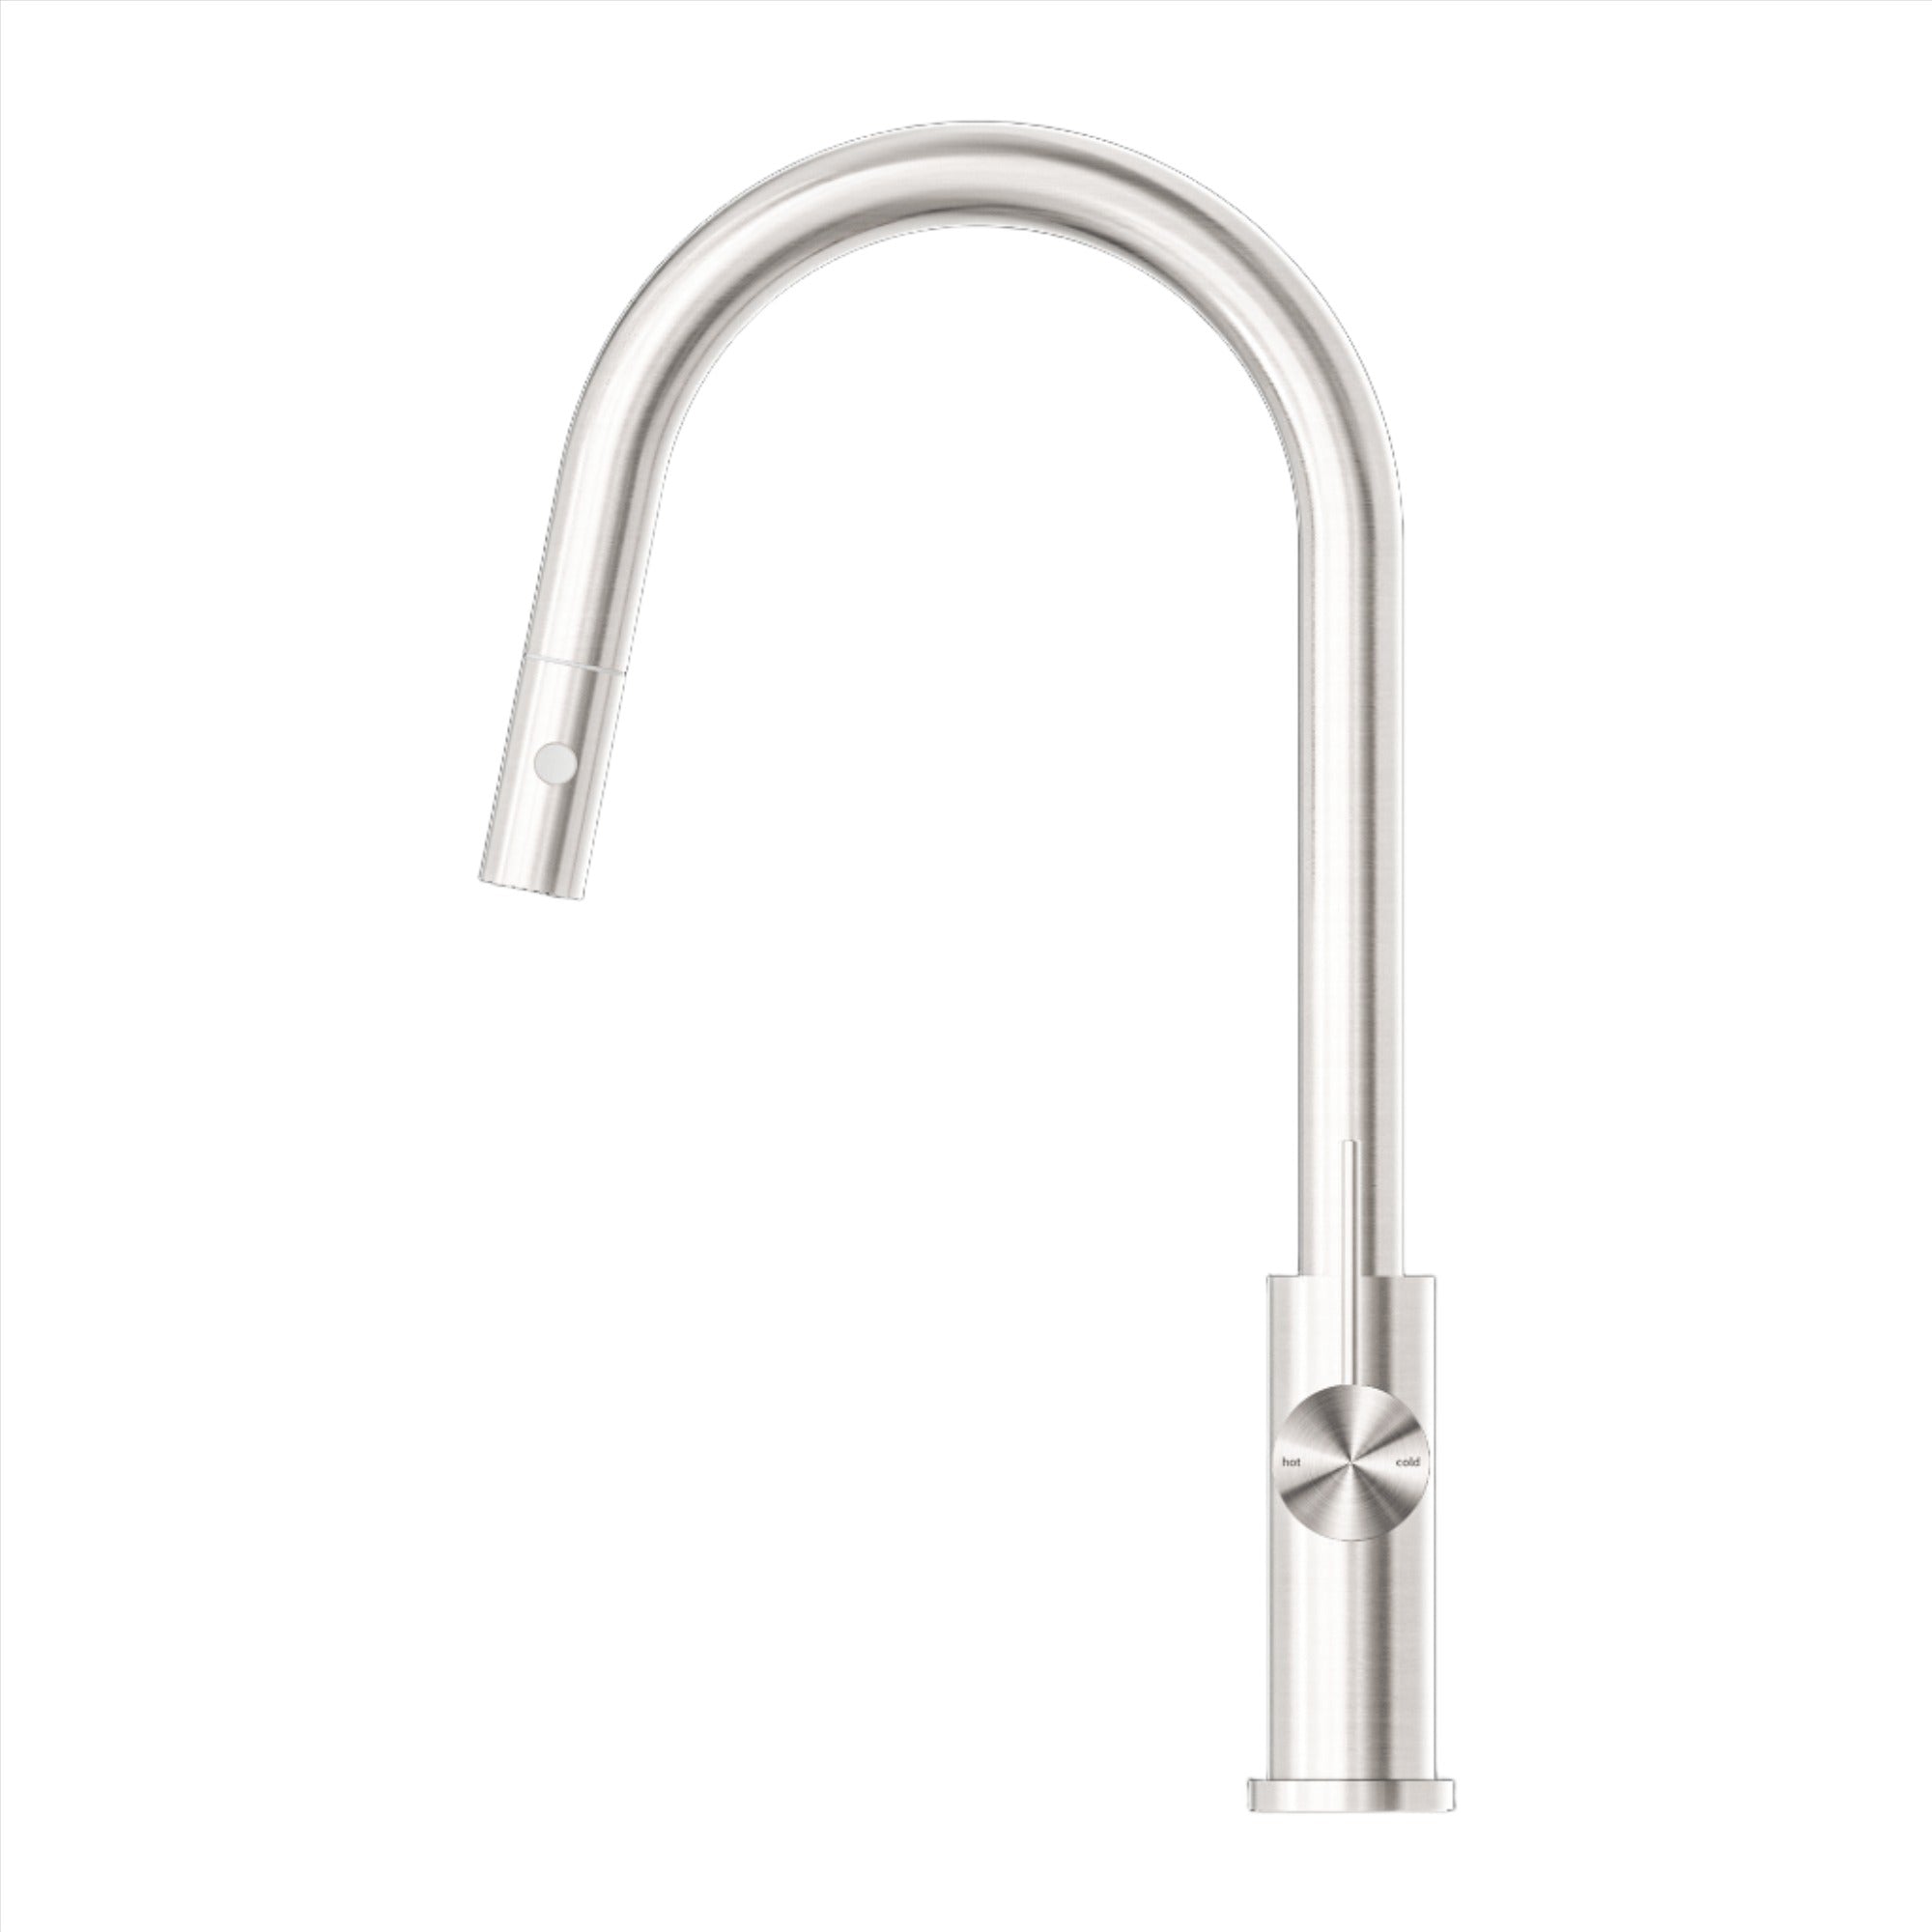 NERO MECCA PULL OUT SINK MIXER WITH VEGIE SPRAY BRUSHED NICKEL